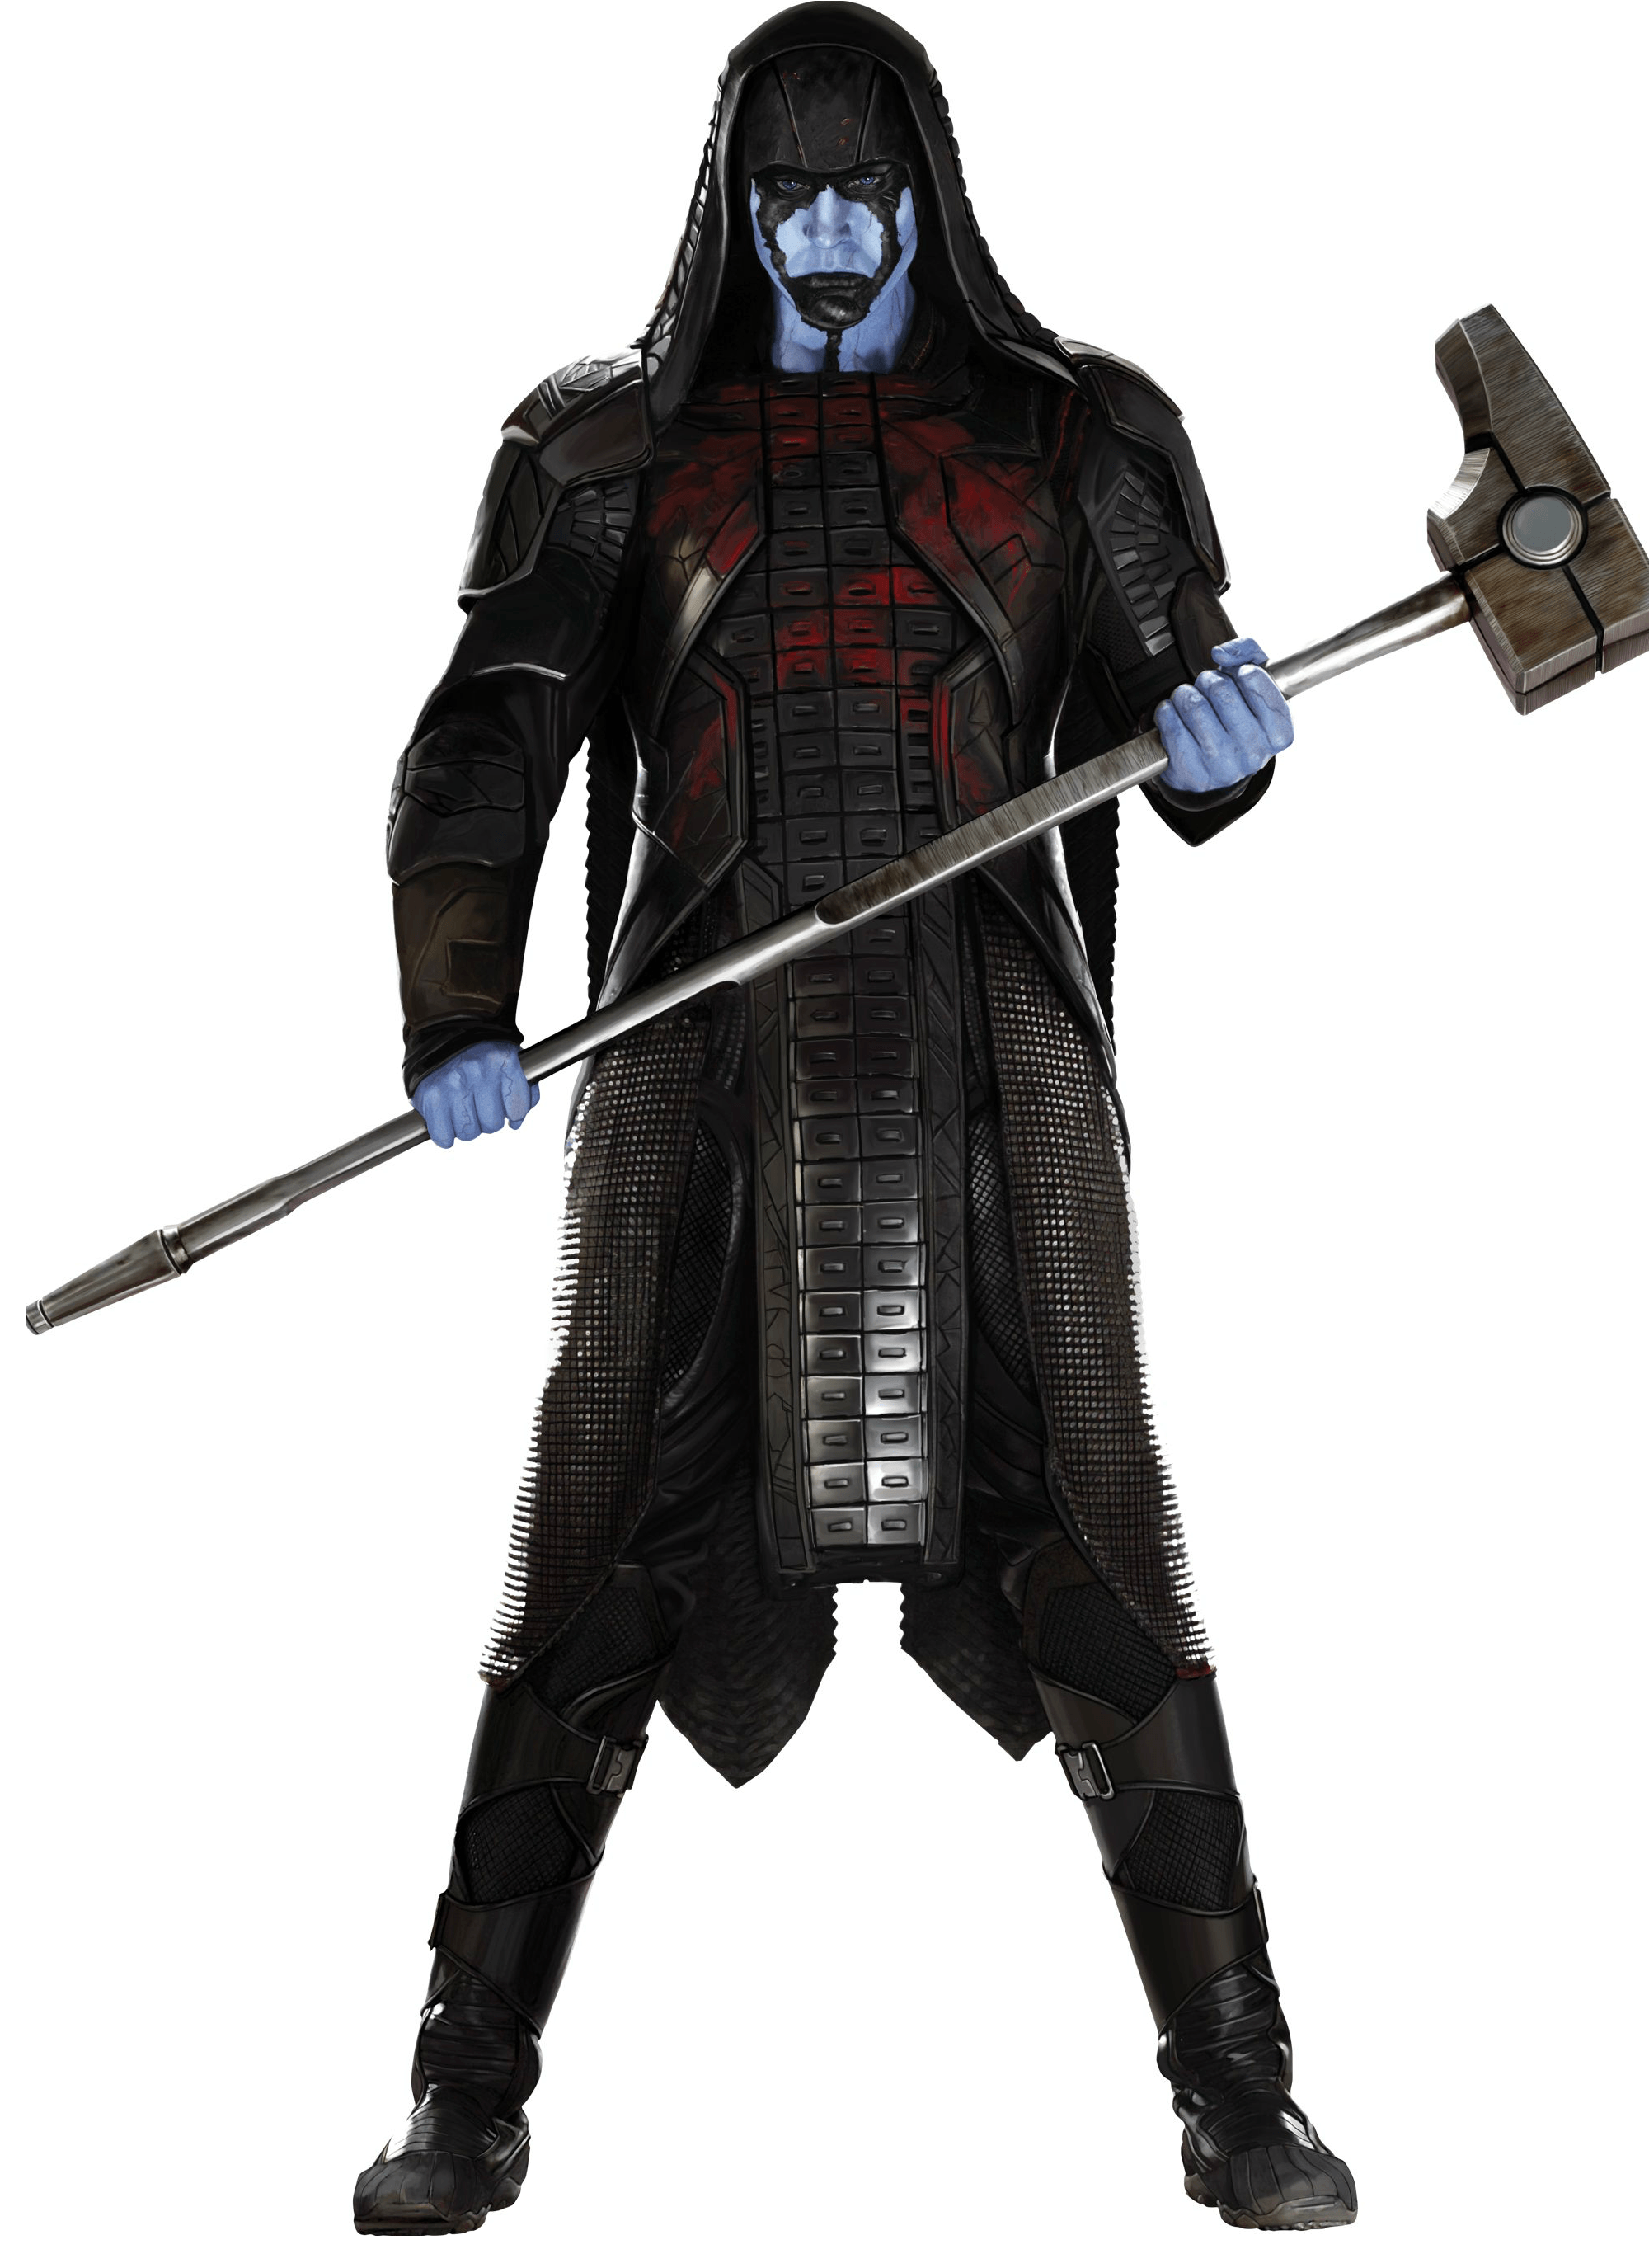 New 'Ronan the Accuser' Promo Art Revealed In GUARDIANS OF THE